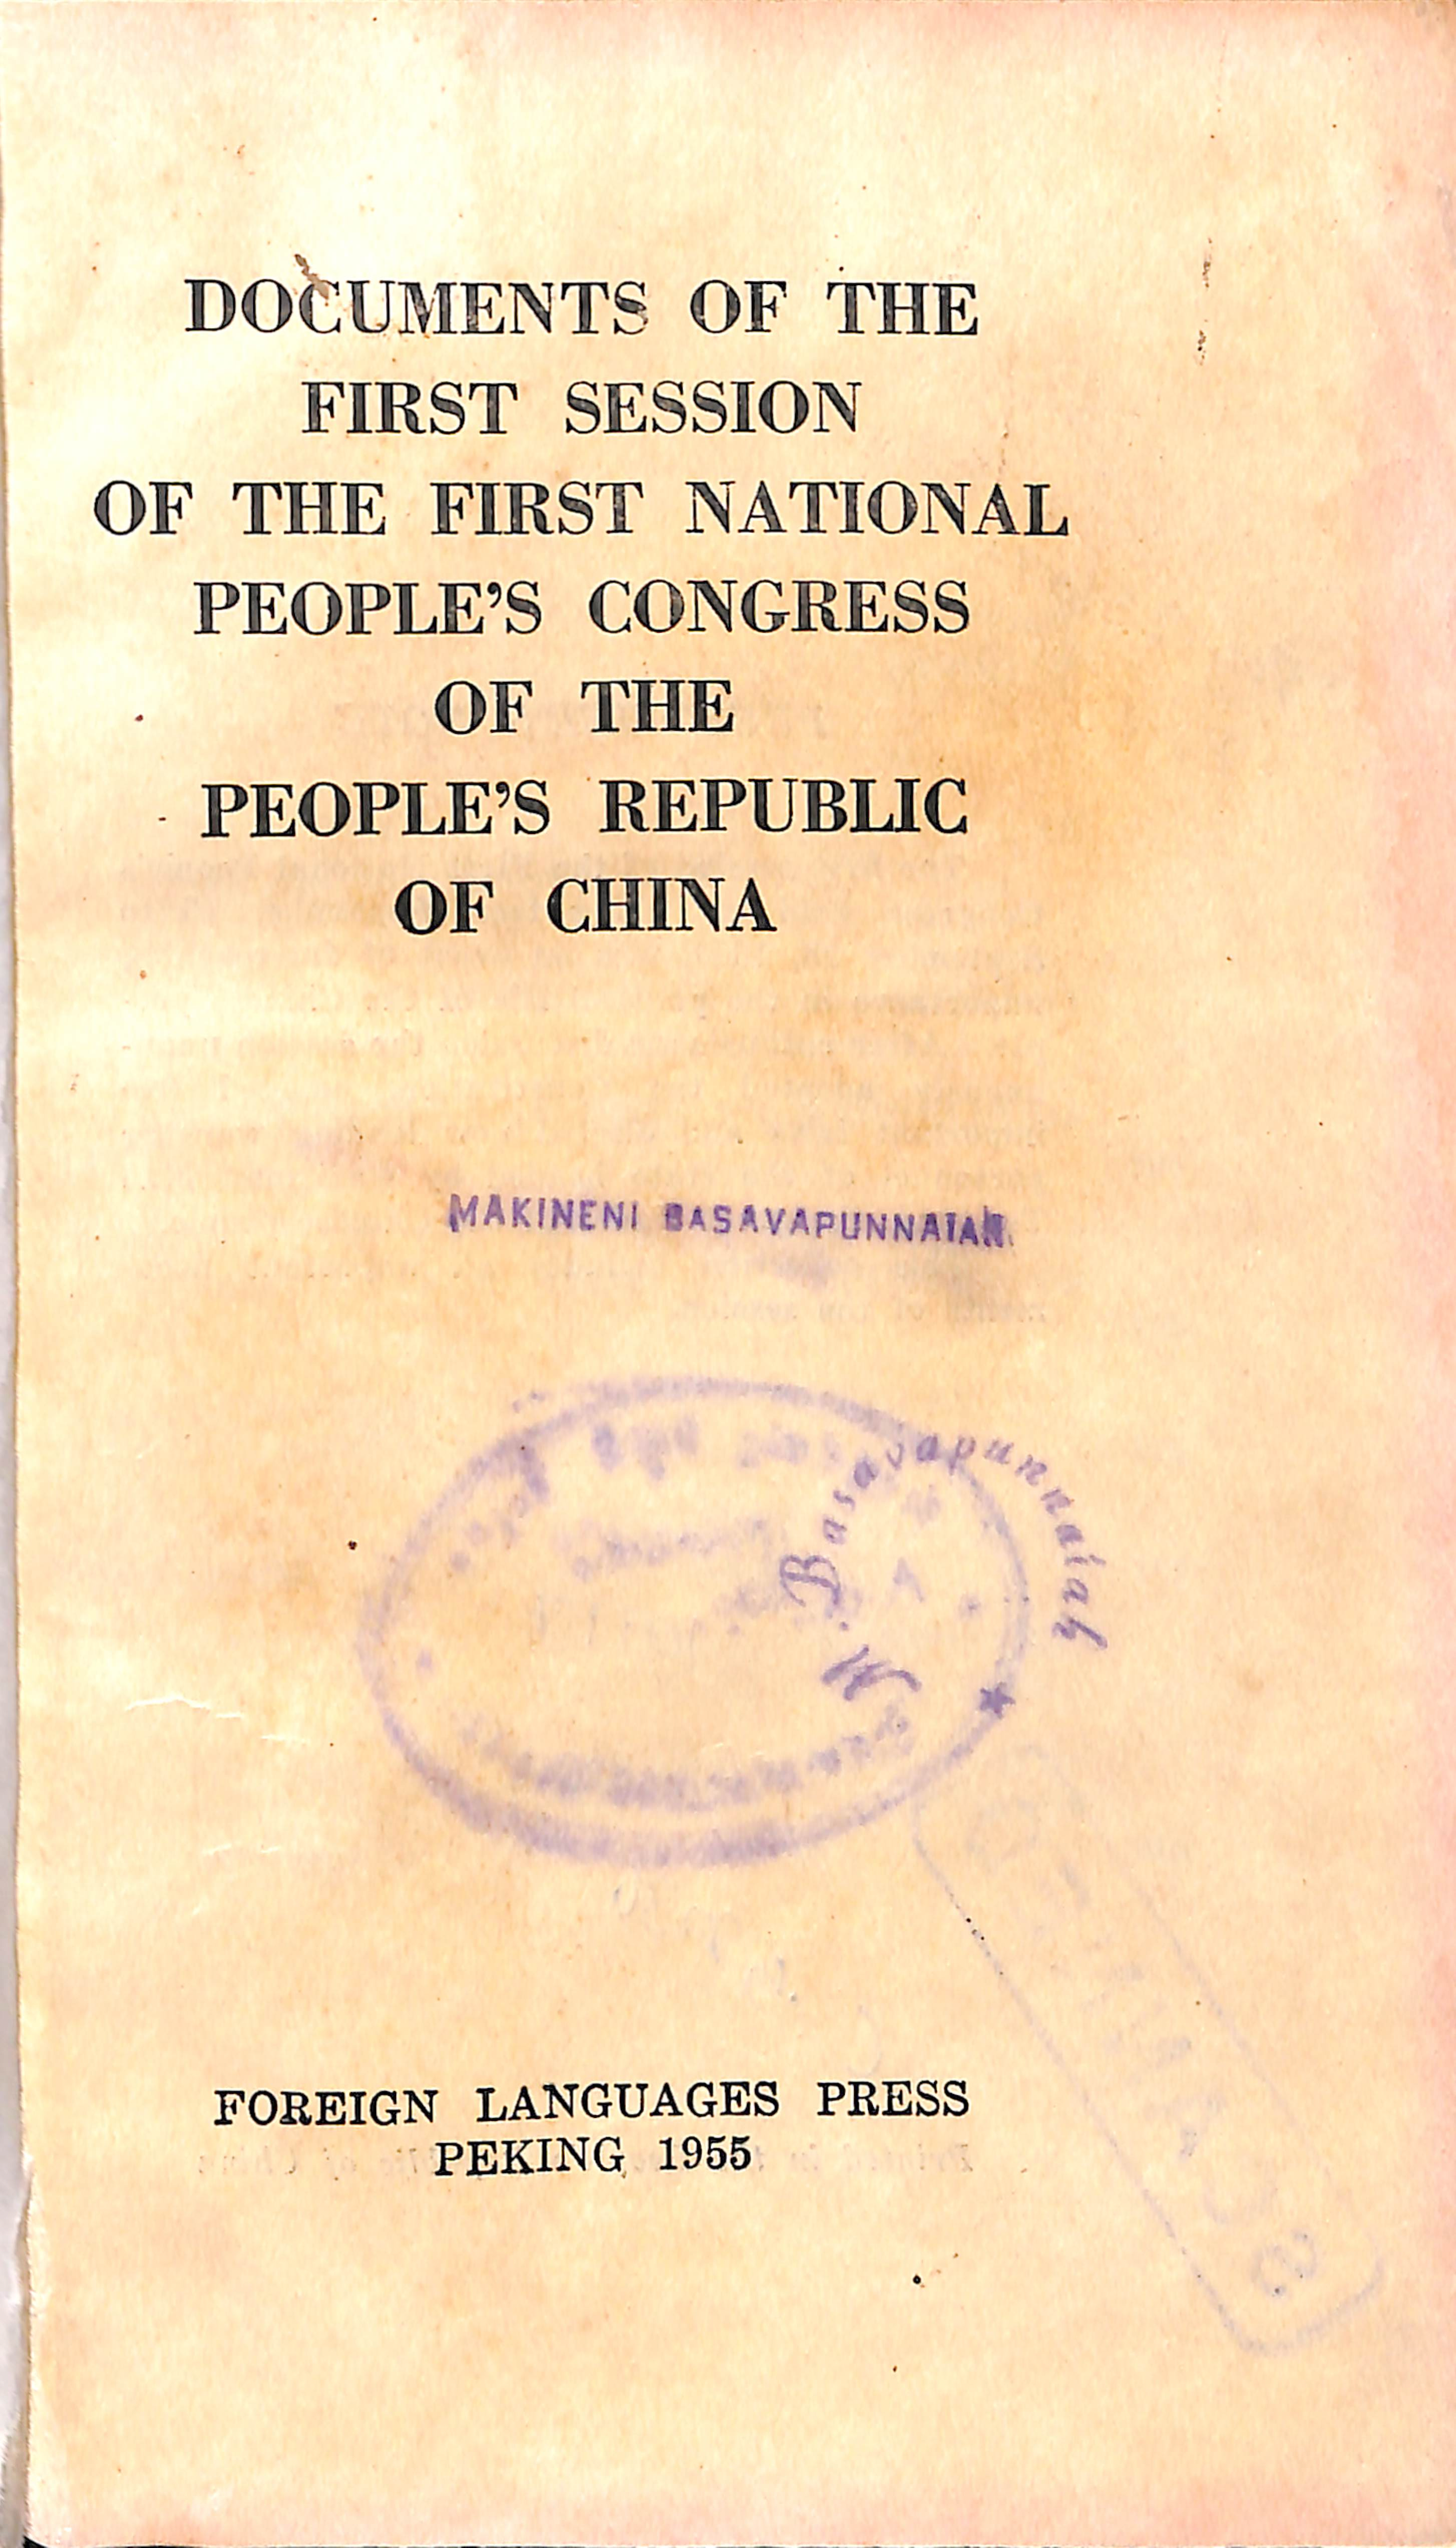 DOCUMENTS OF THE FIRST SESSION OF THE FIRST NATIONAL PEOPLE'S CONGRESS OF THE PEOPLE'S RUPUBLIC OF CHINA